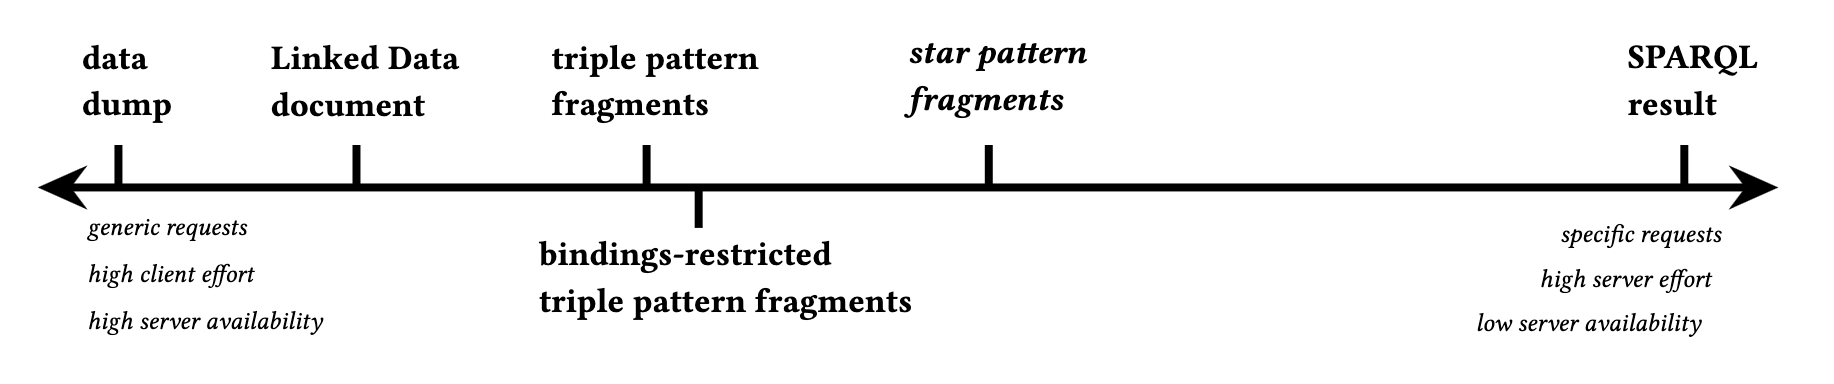 Linked Data Fragments Axis